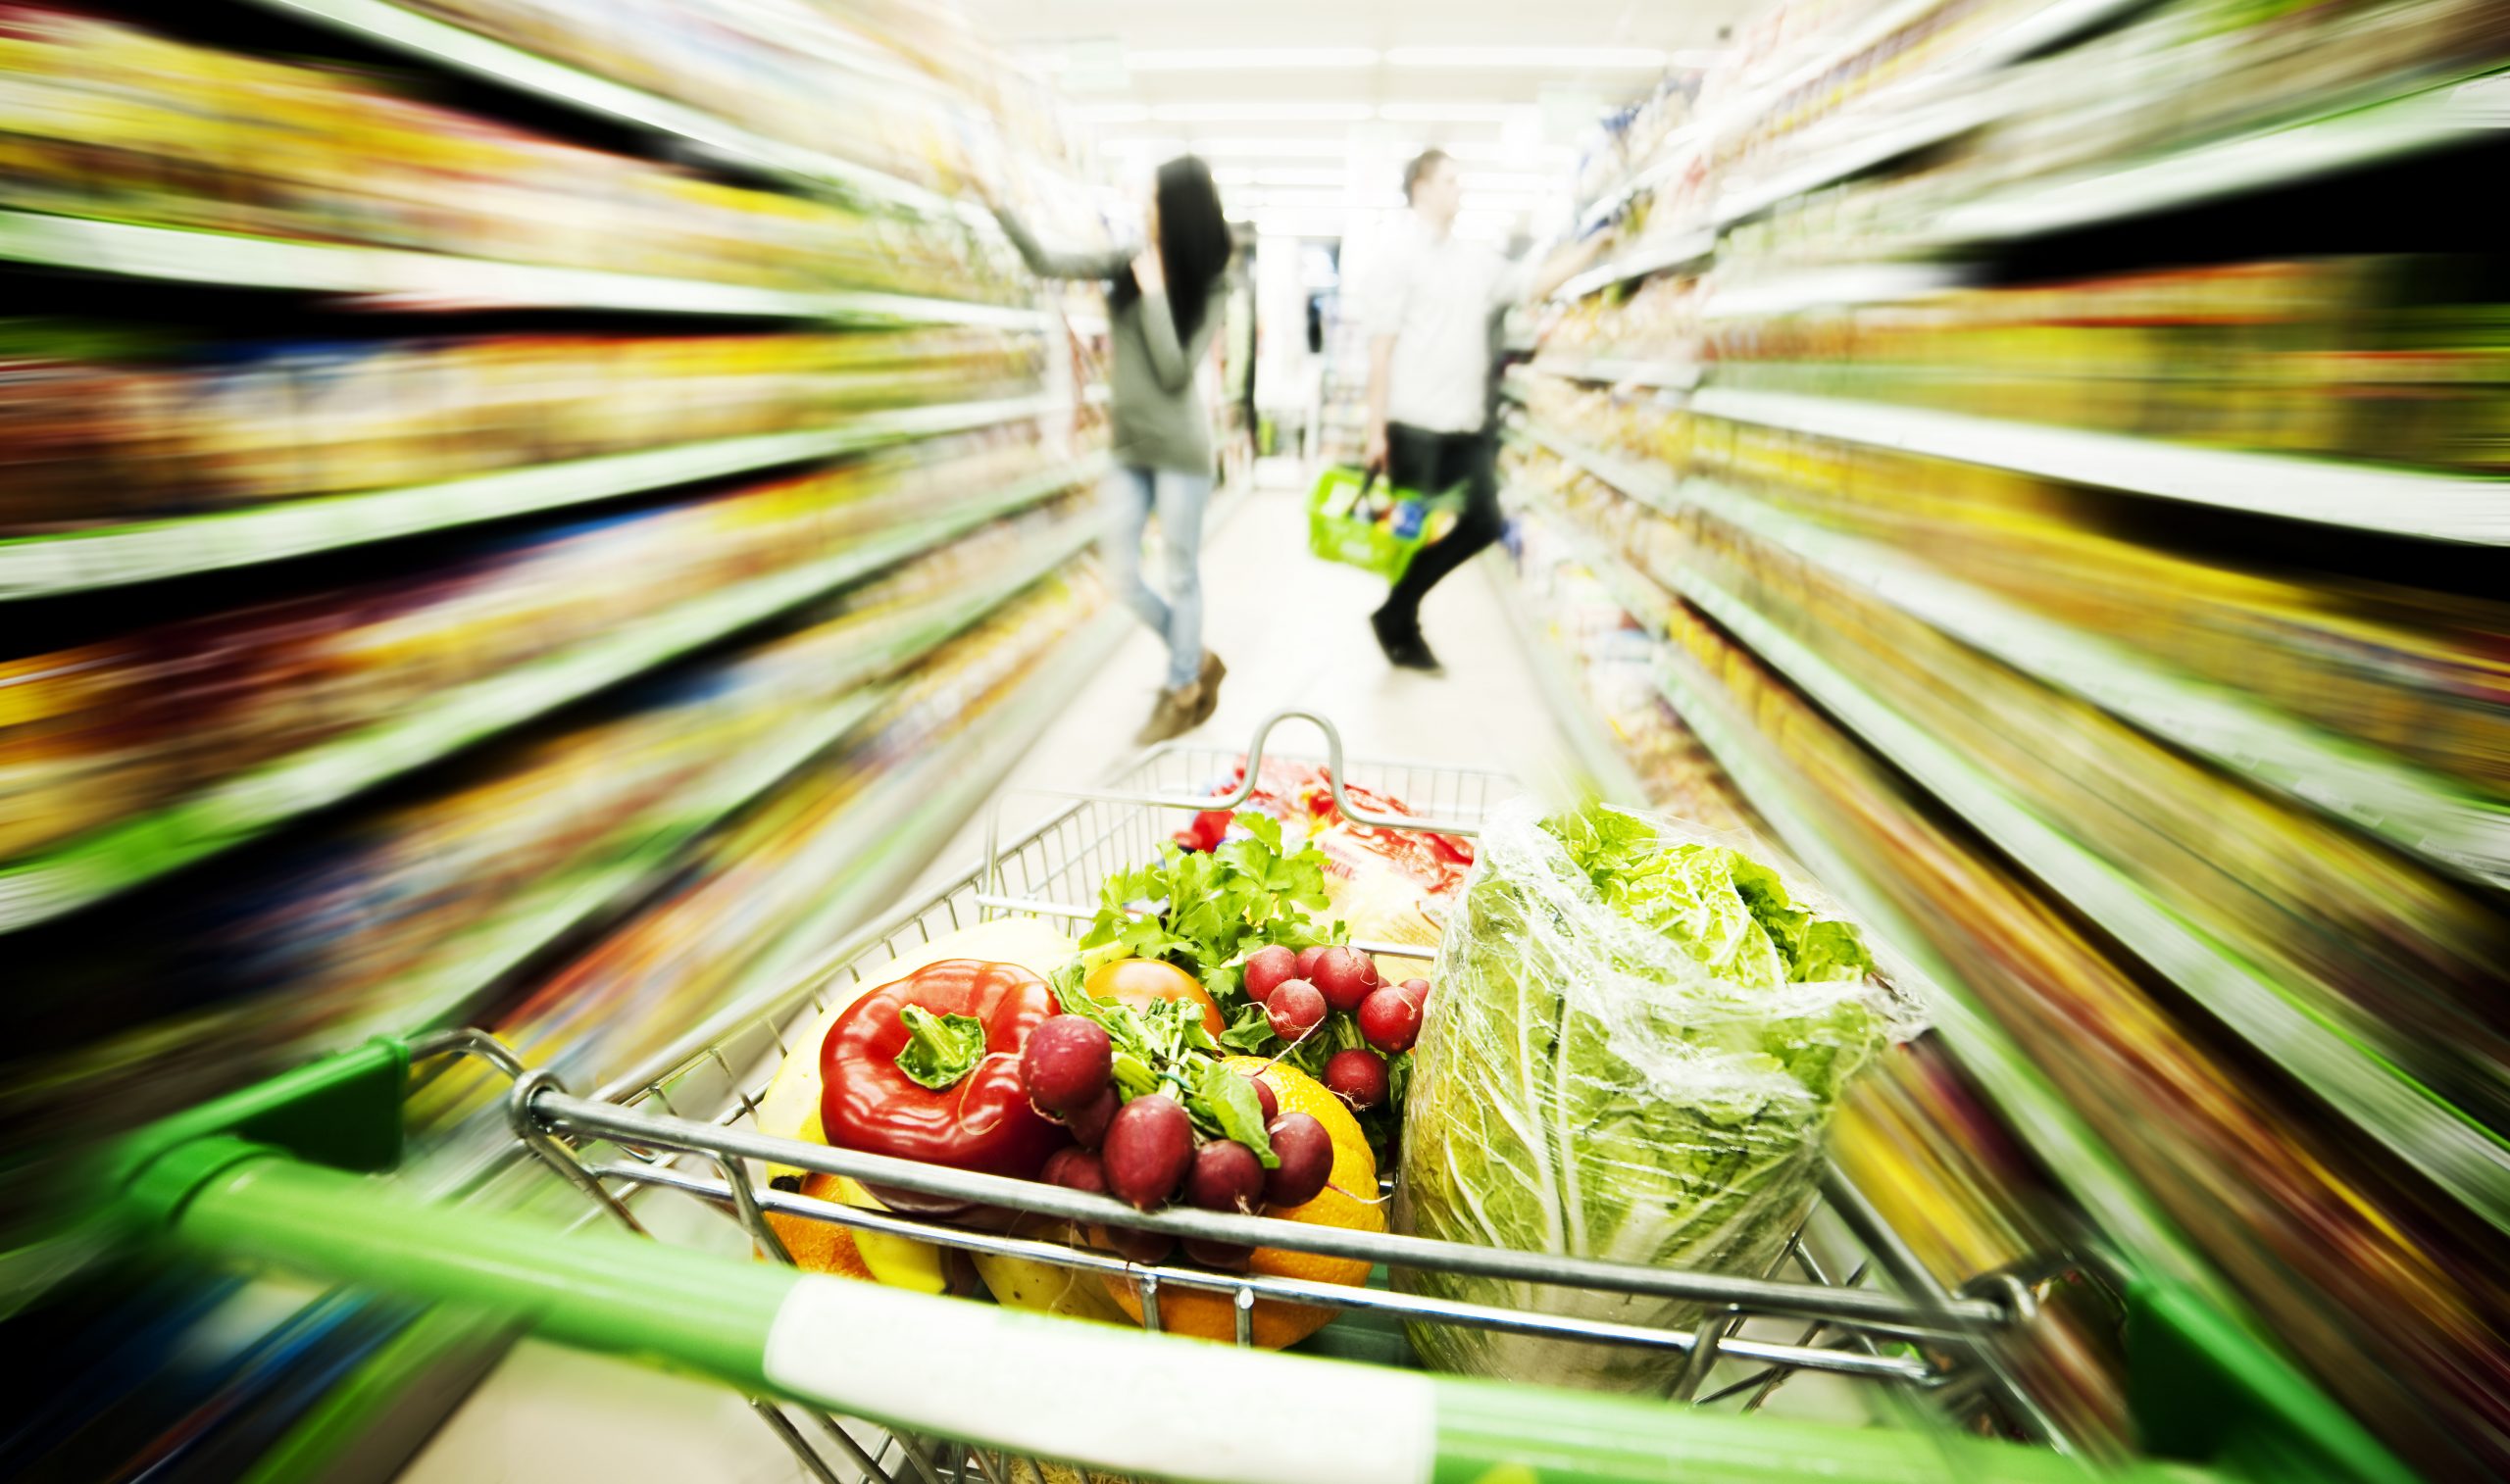 Supermarkets – Investments of 270m. euros by big5 in 2022